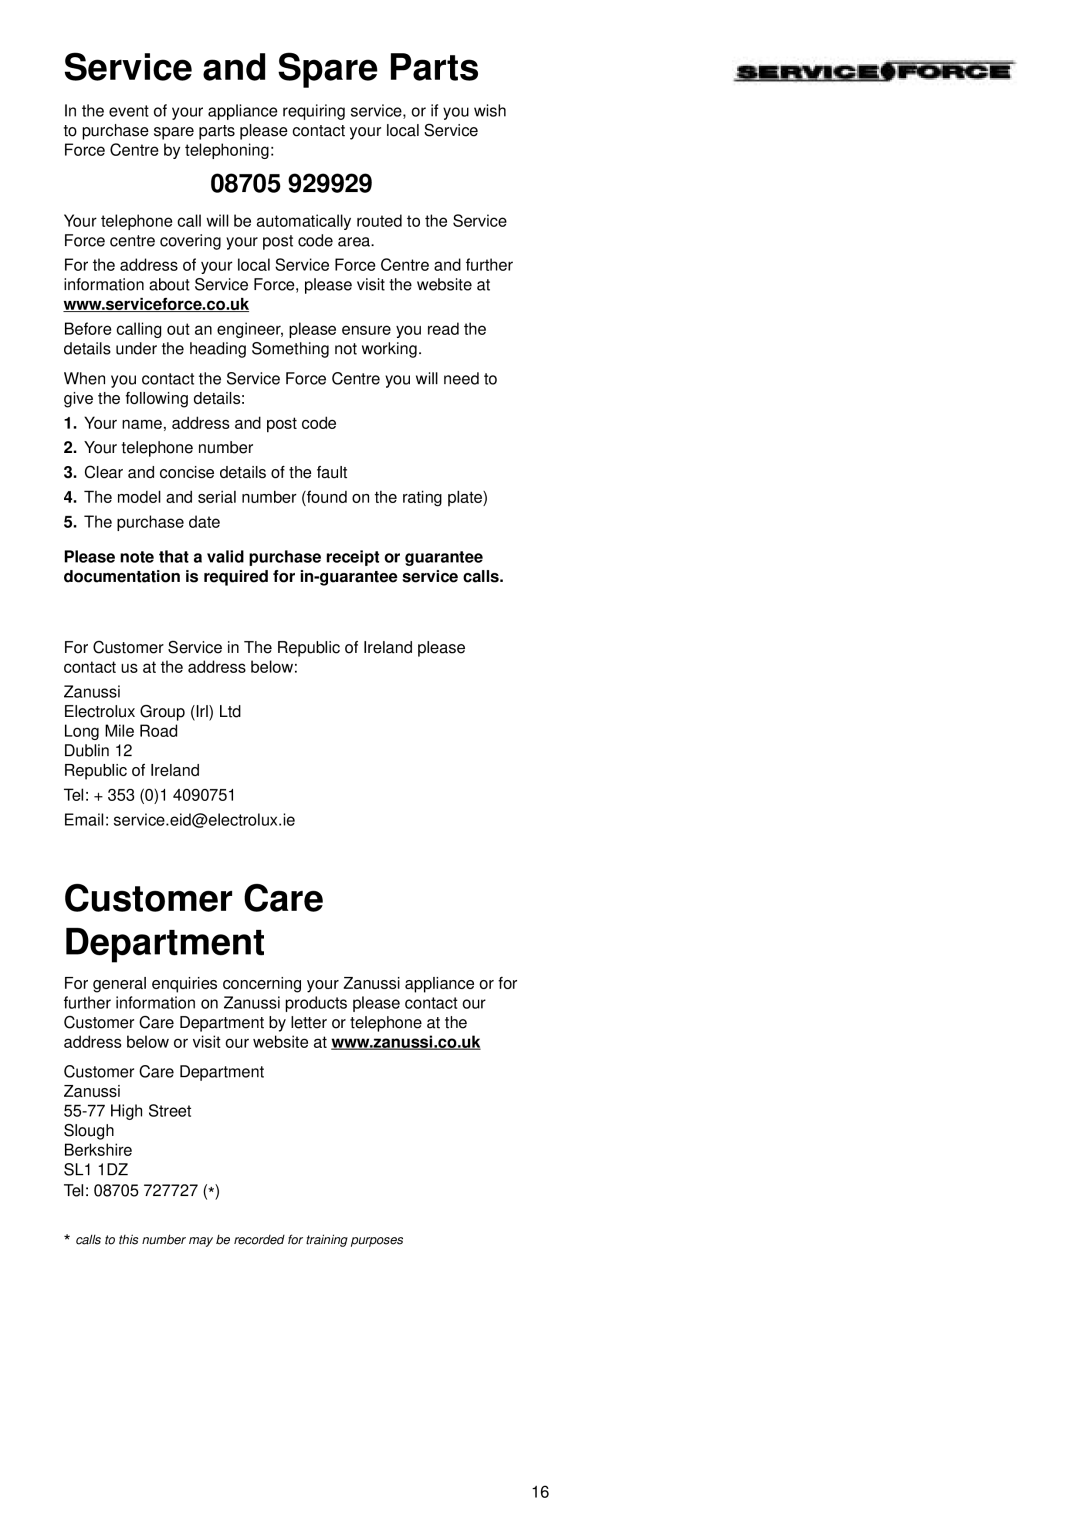 Zanussi ZDT 5053 manual Service and Spare Parts, Customer Care Department, 08705 